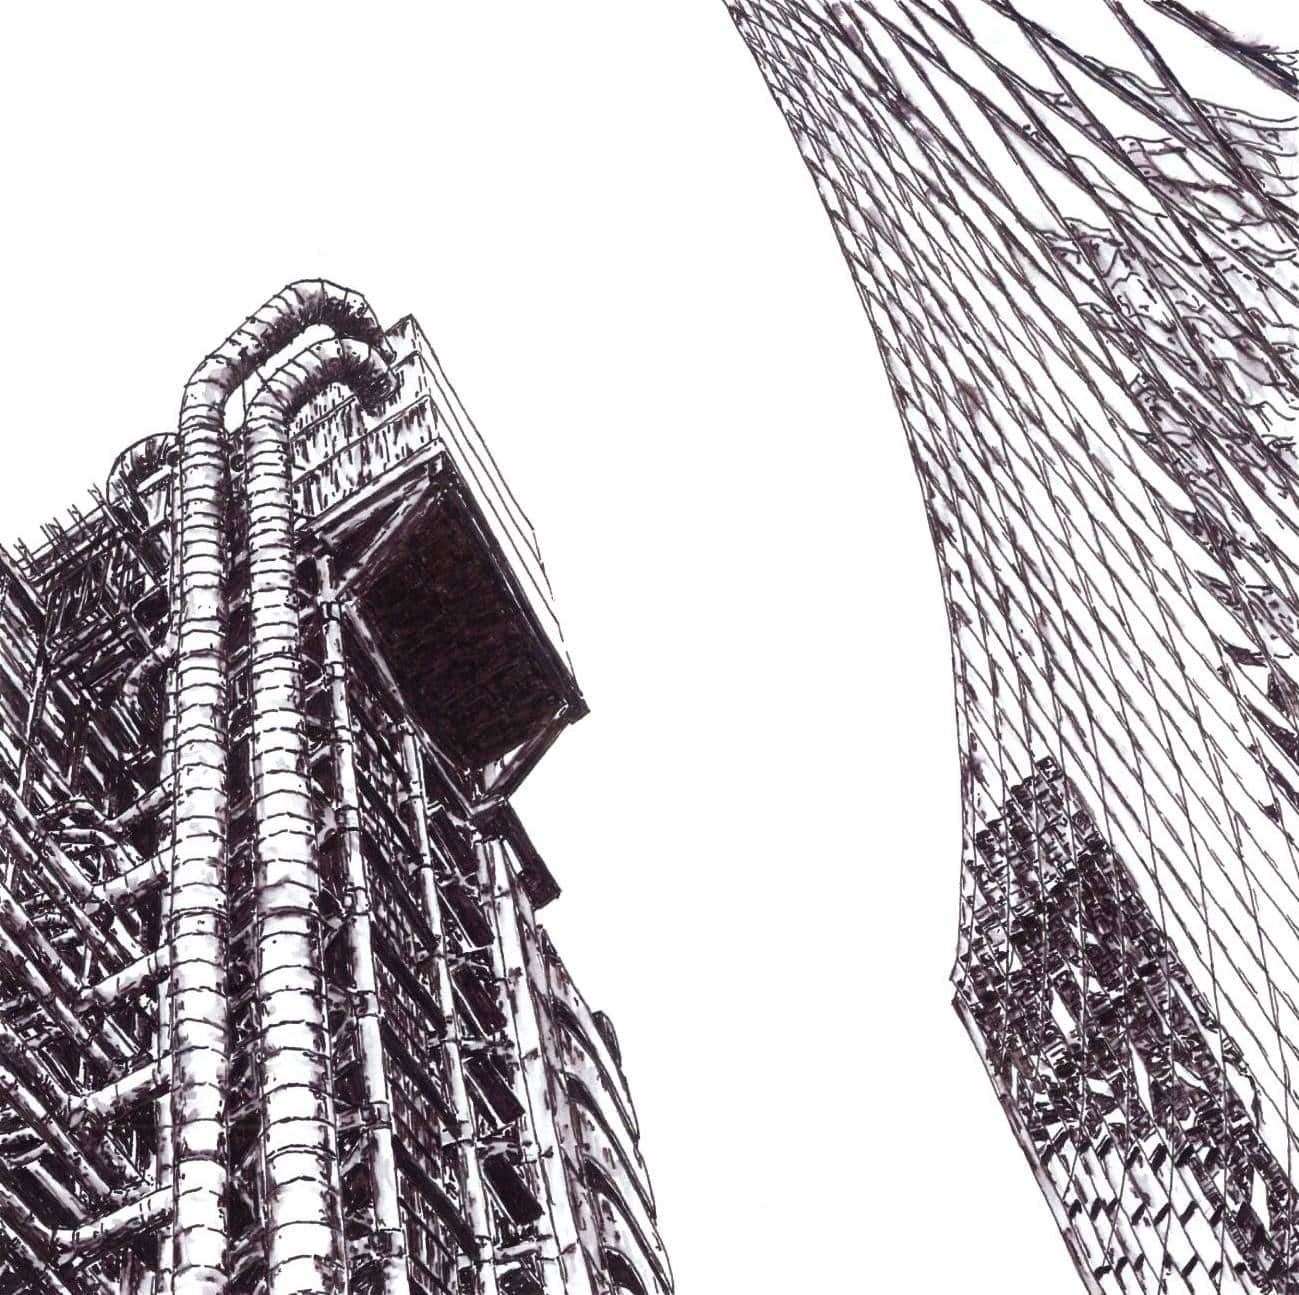 Jack Hines and his intricate drawings of Lonon's buildings